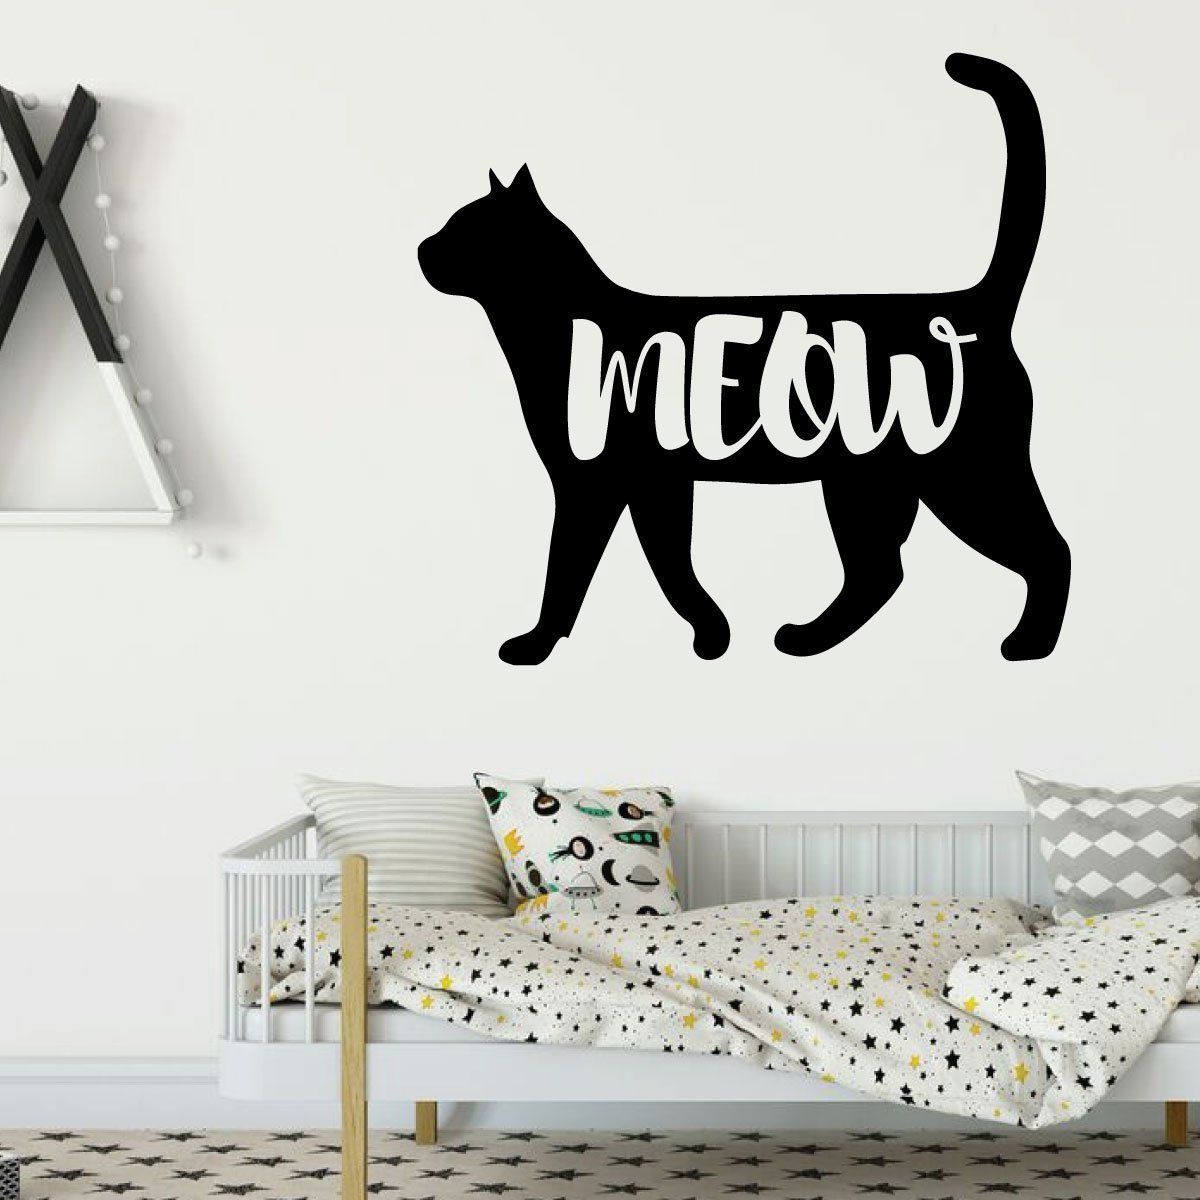 Cat Silhouette Wall Decal Vinyl Decor Wall Decal – Customvinyldecor For Most Up To Date Silhouette Wall Art (View 17 of 20)